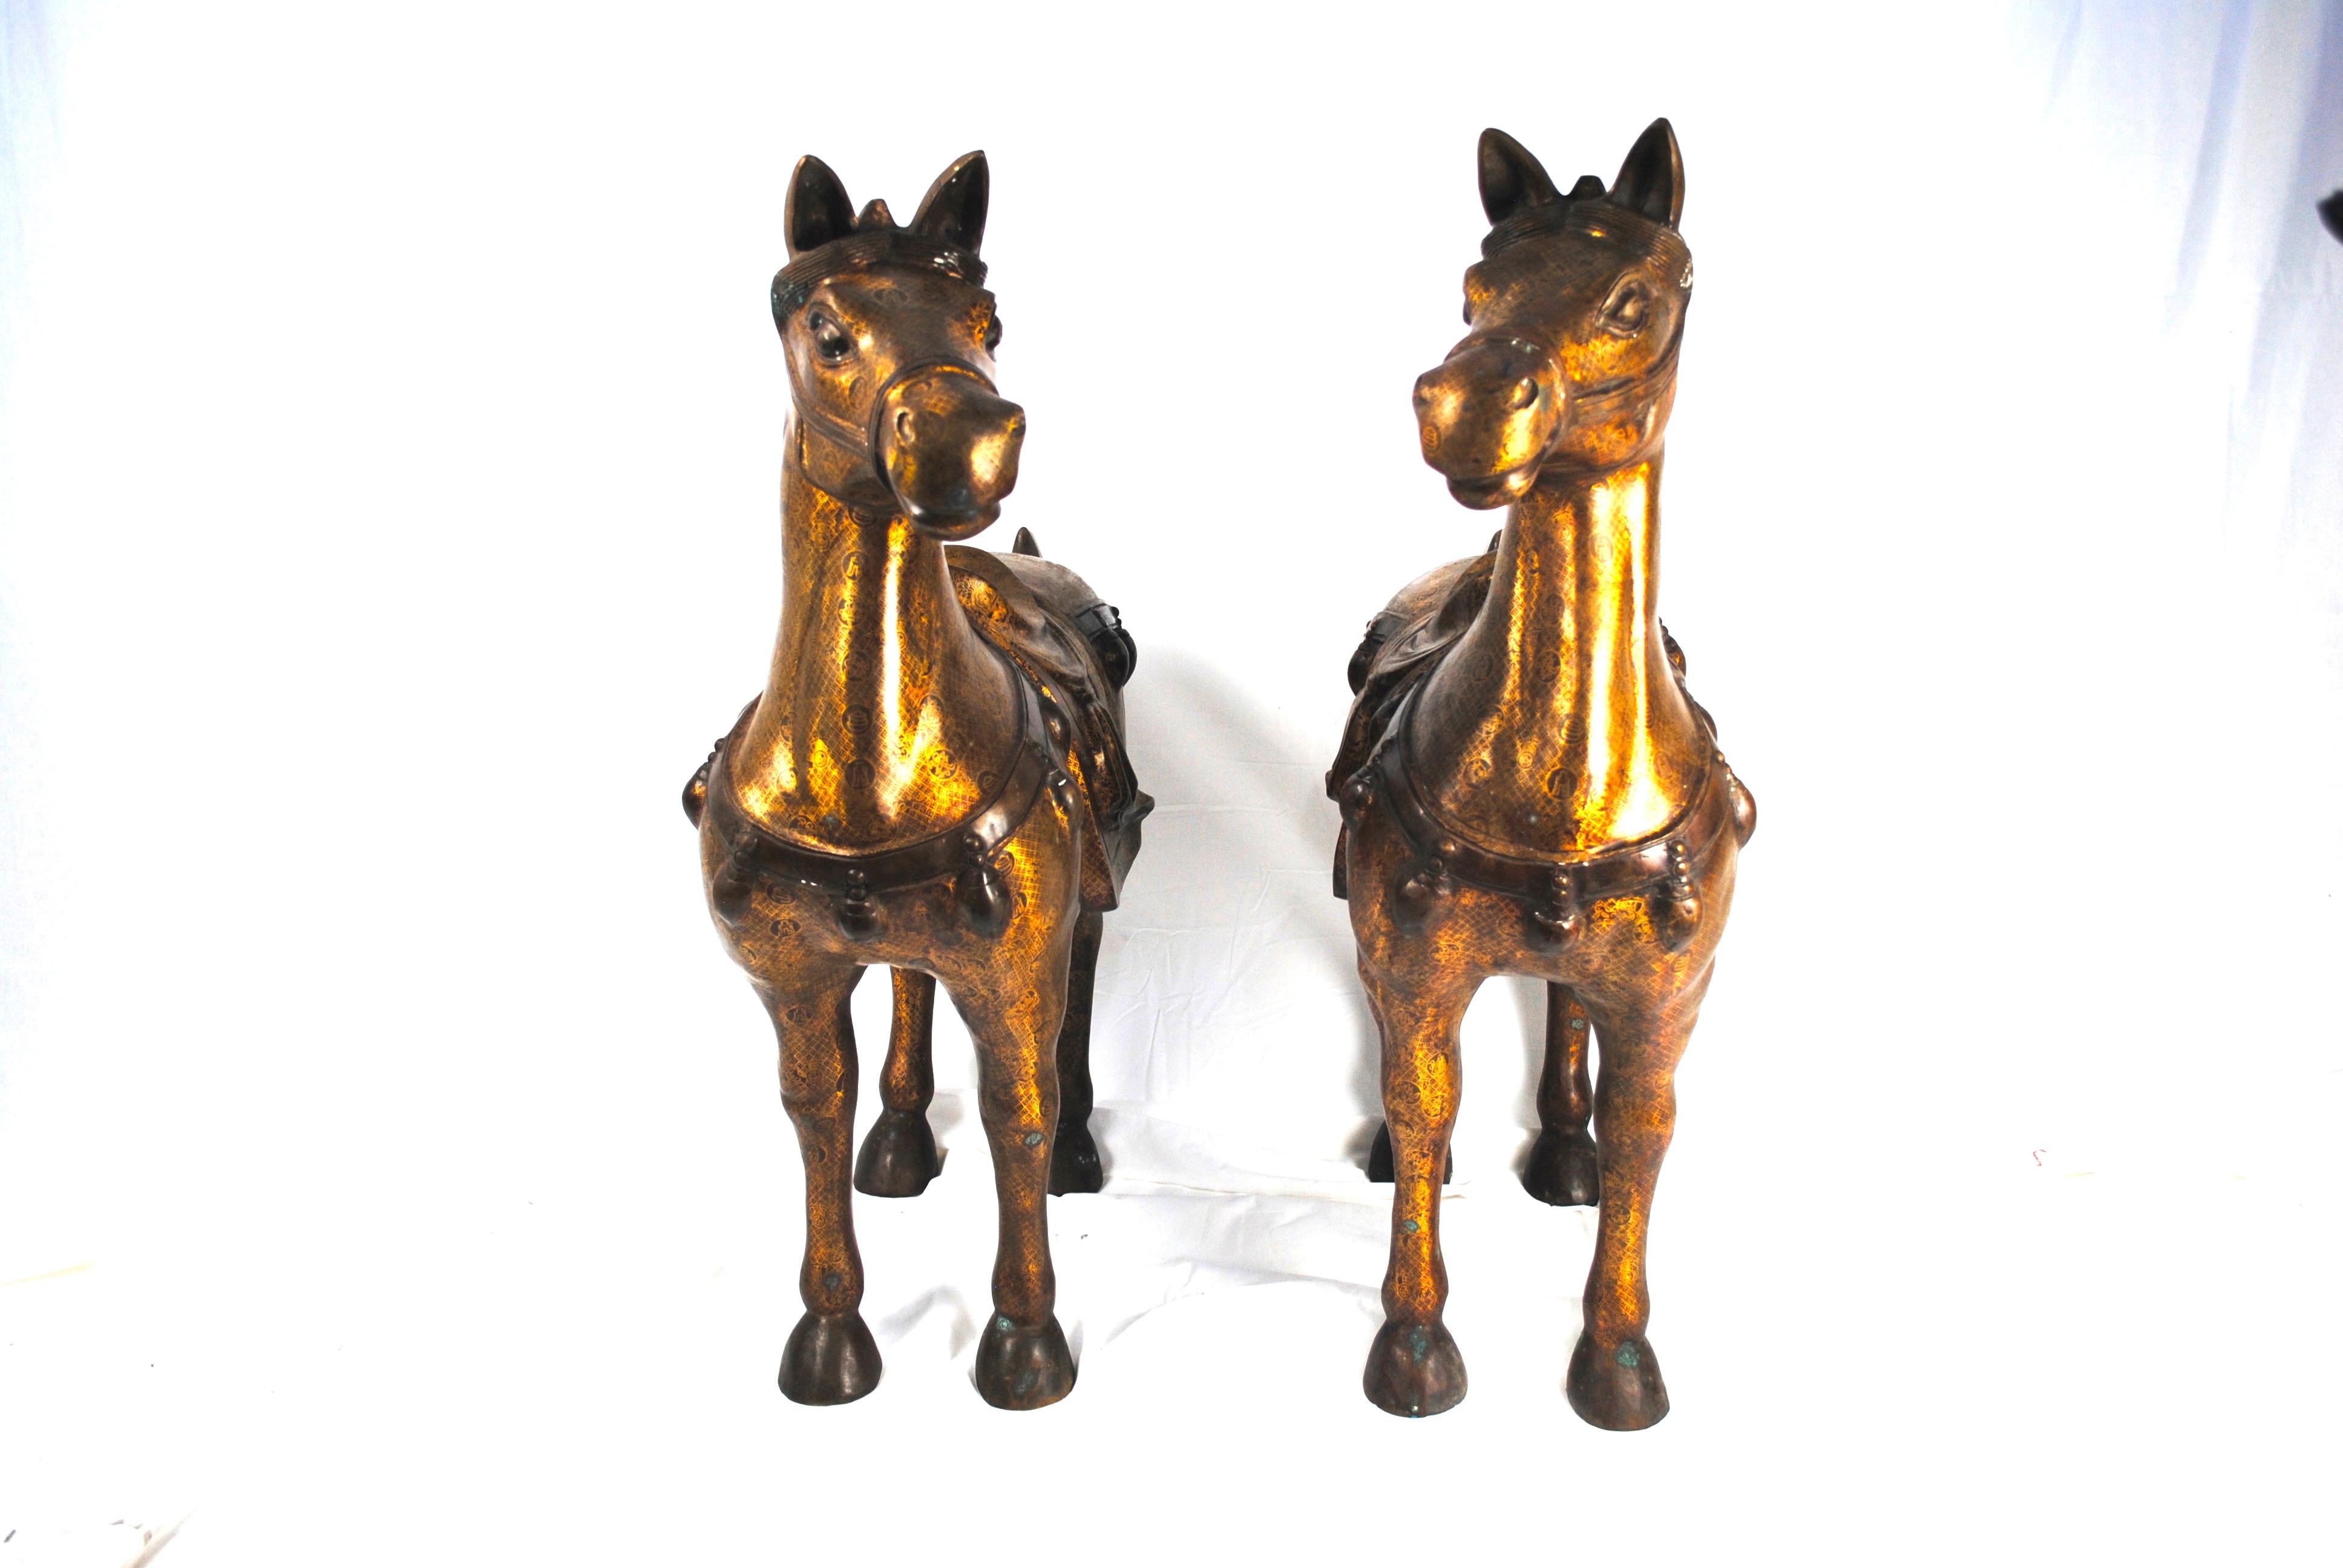 A pair of 20th century bronze gilded gift horses.
Lavish pair of cast brass and gold gilt horse statues or sculptures made in the Chinese Tang dynasty style. Features intricately cast bodies with detailed Chinese characters echoed over the both